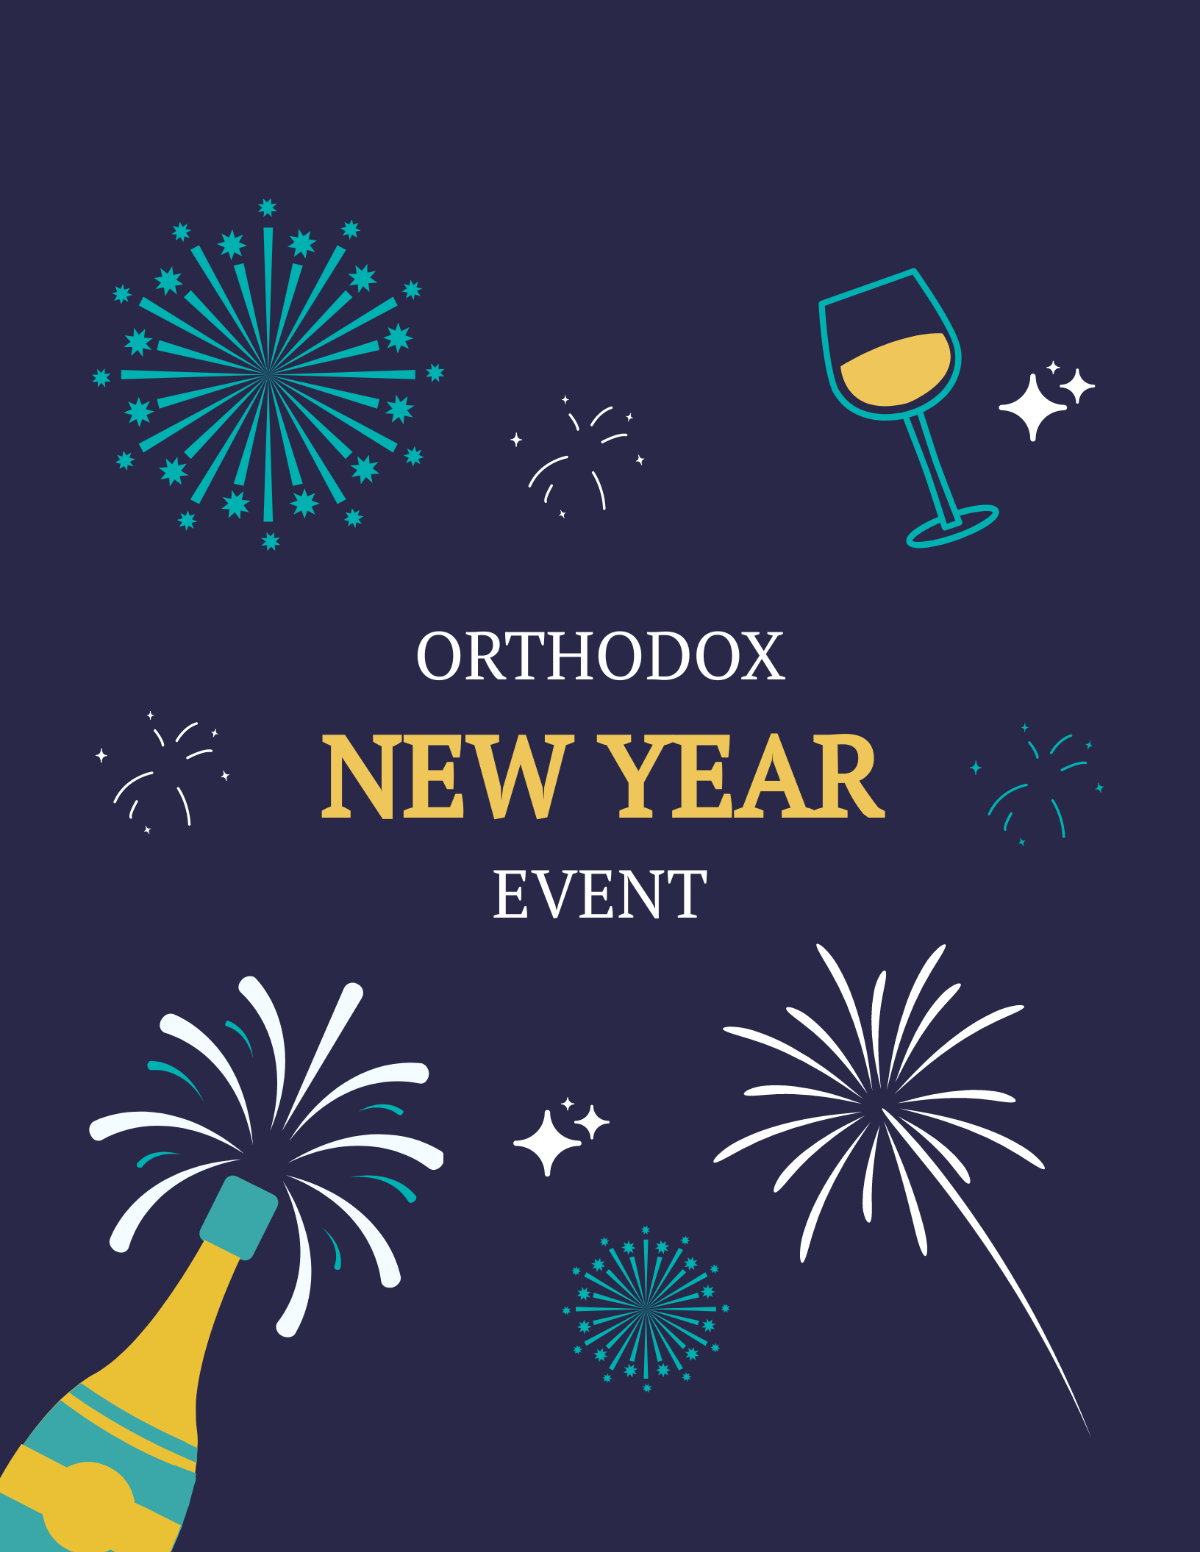 Orthodox New Year Event Flyer Template